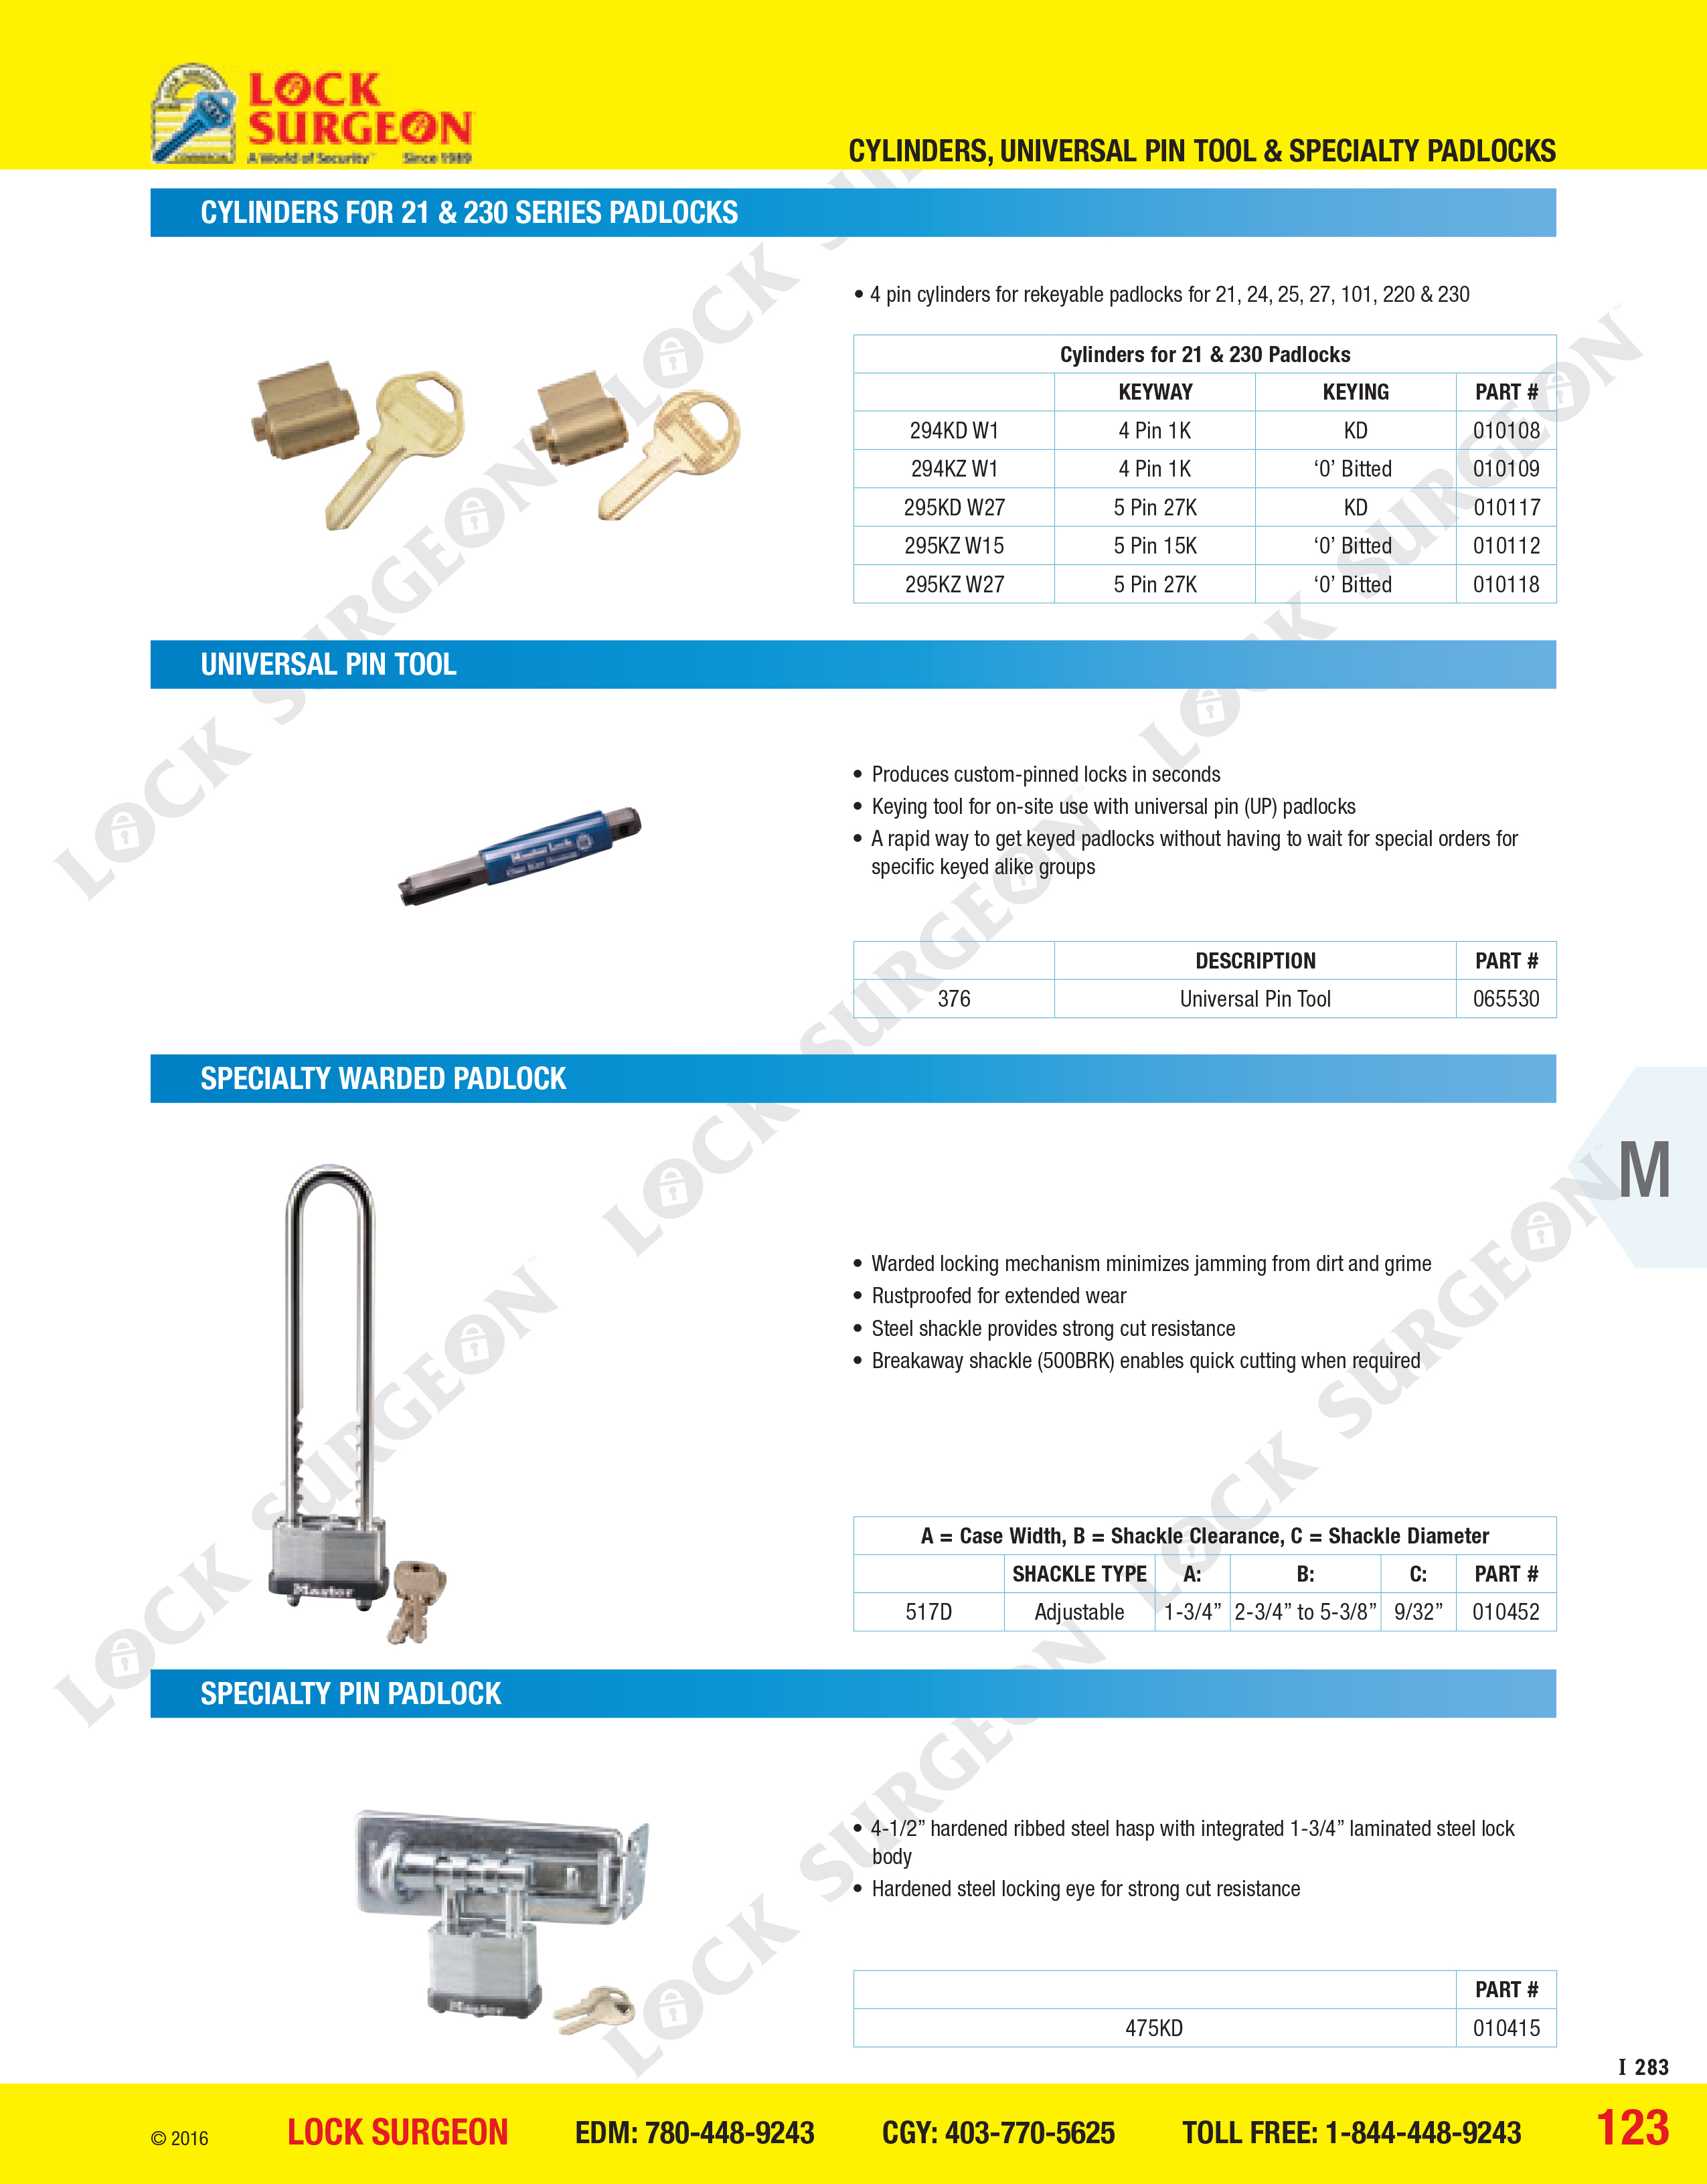 Cylinders for 21 & 230 series padlocks, universal pin tool, specialty warded padlock & pin